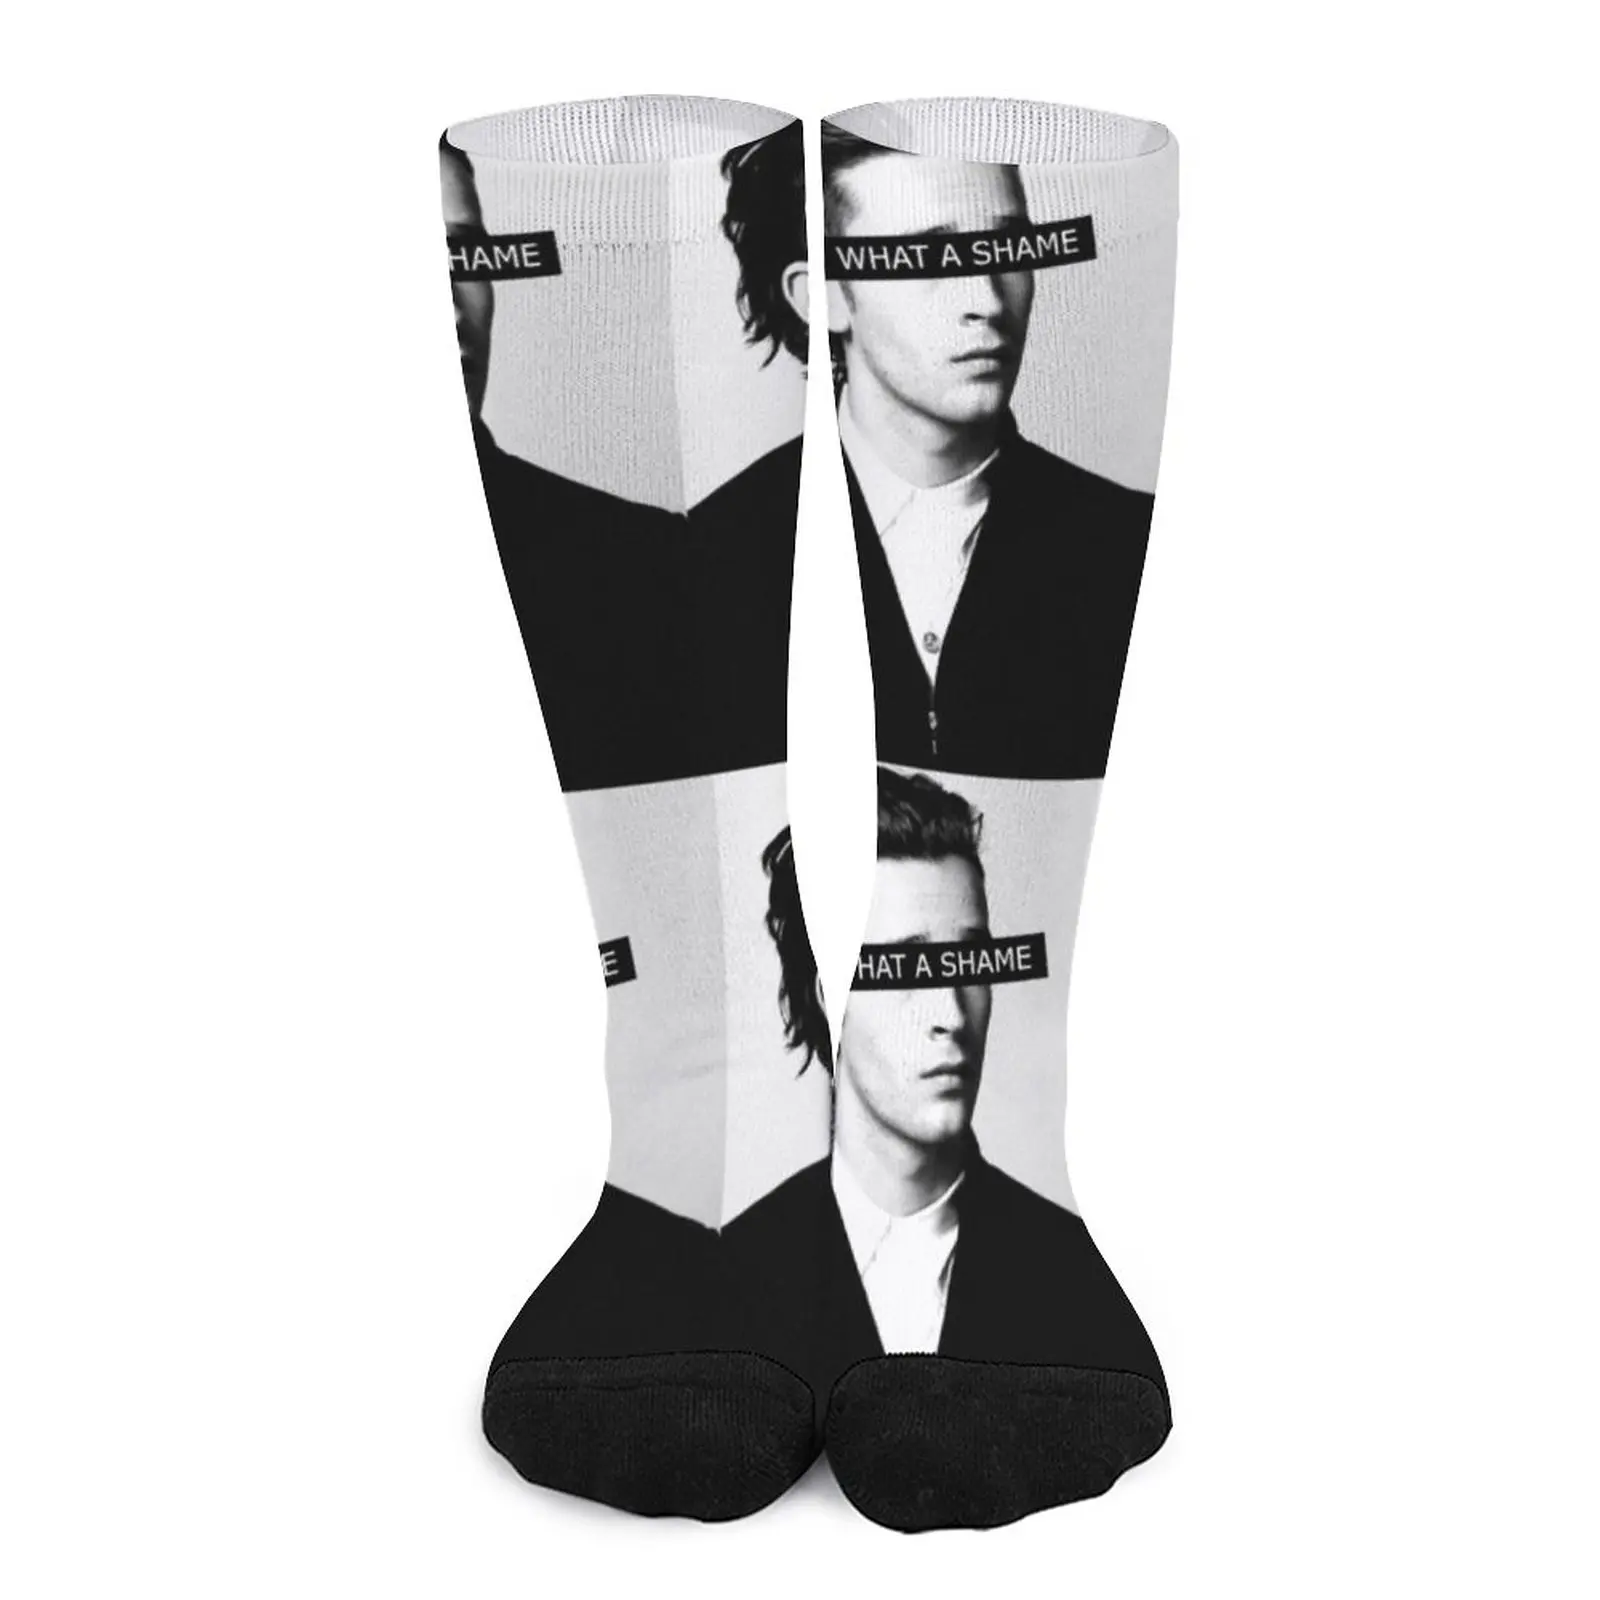 WHAT A SHAME - Matty Healy of The 1975 Socks happy socks Wholesale joan didion what she means